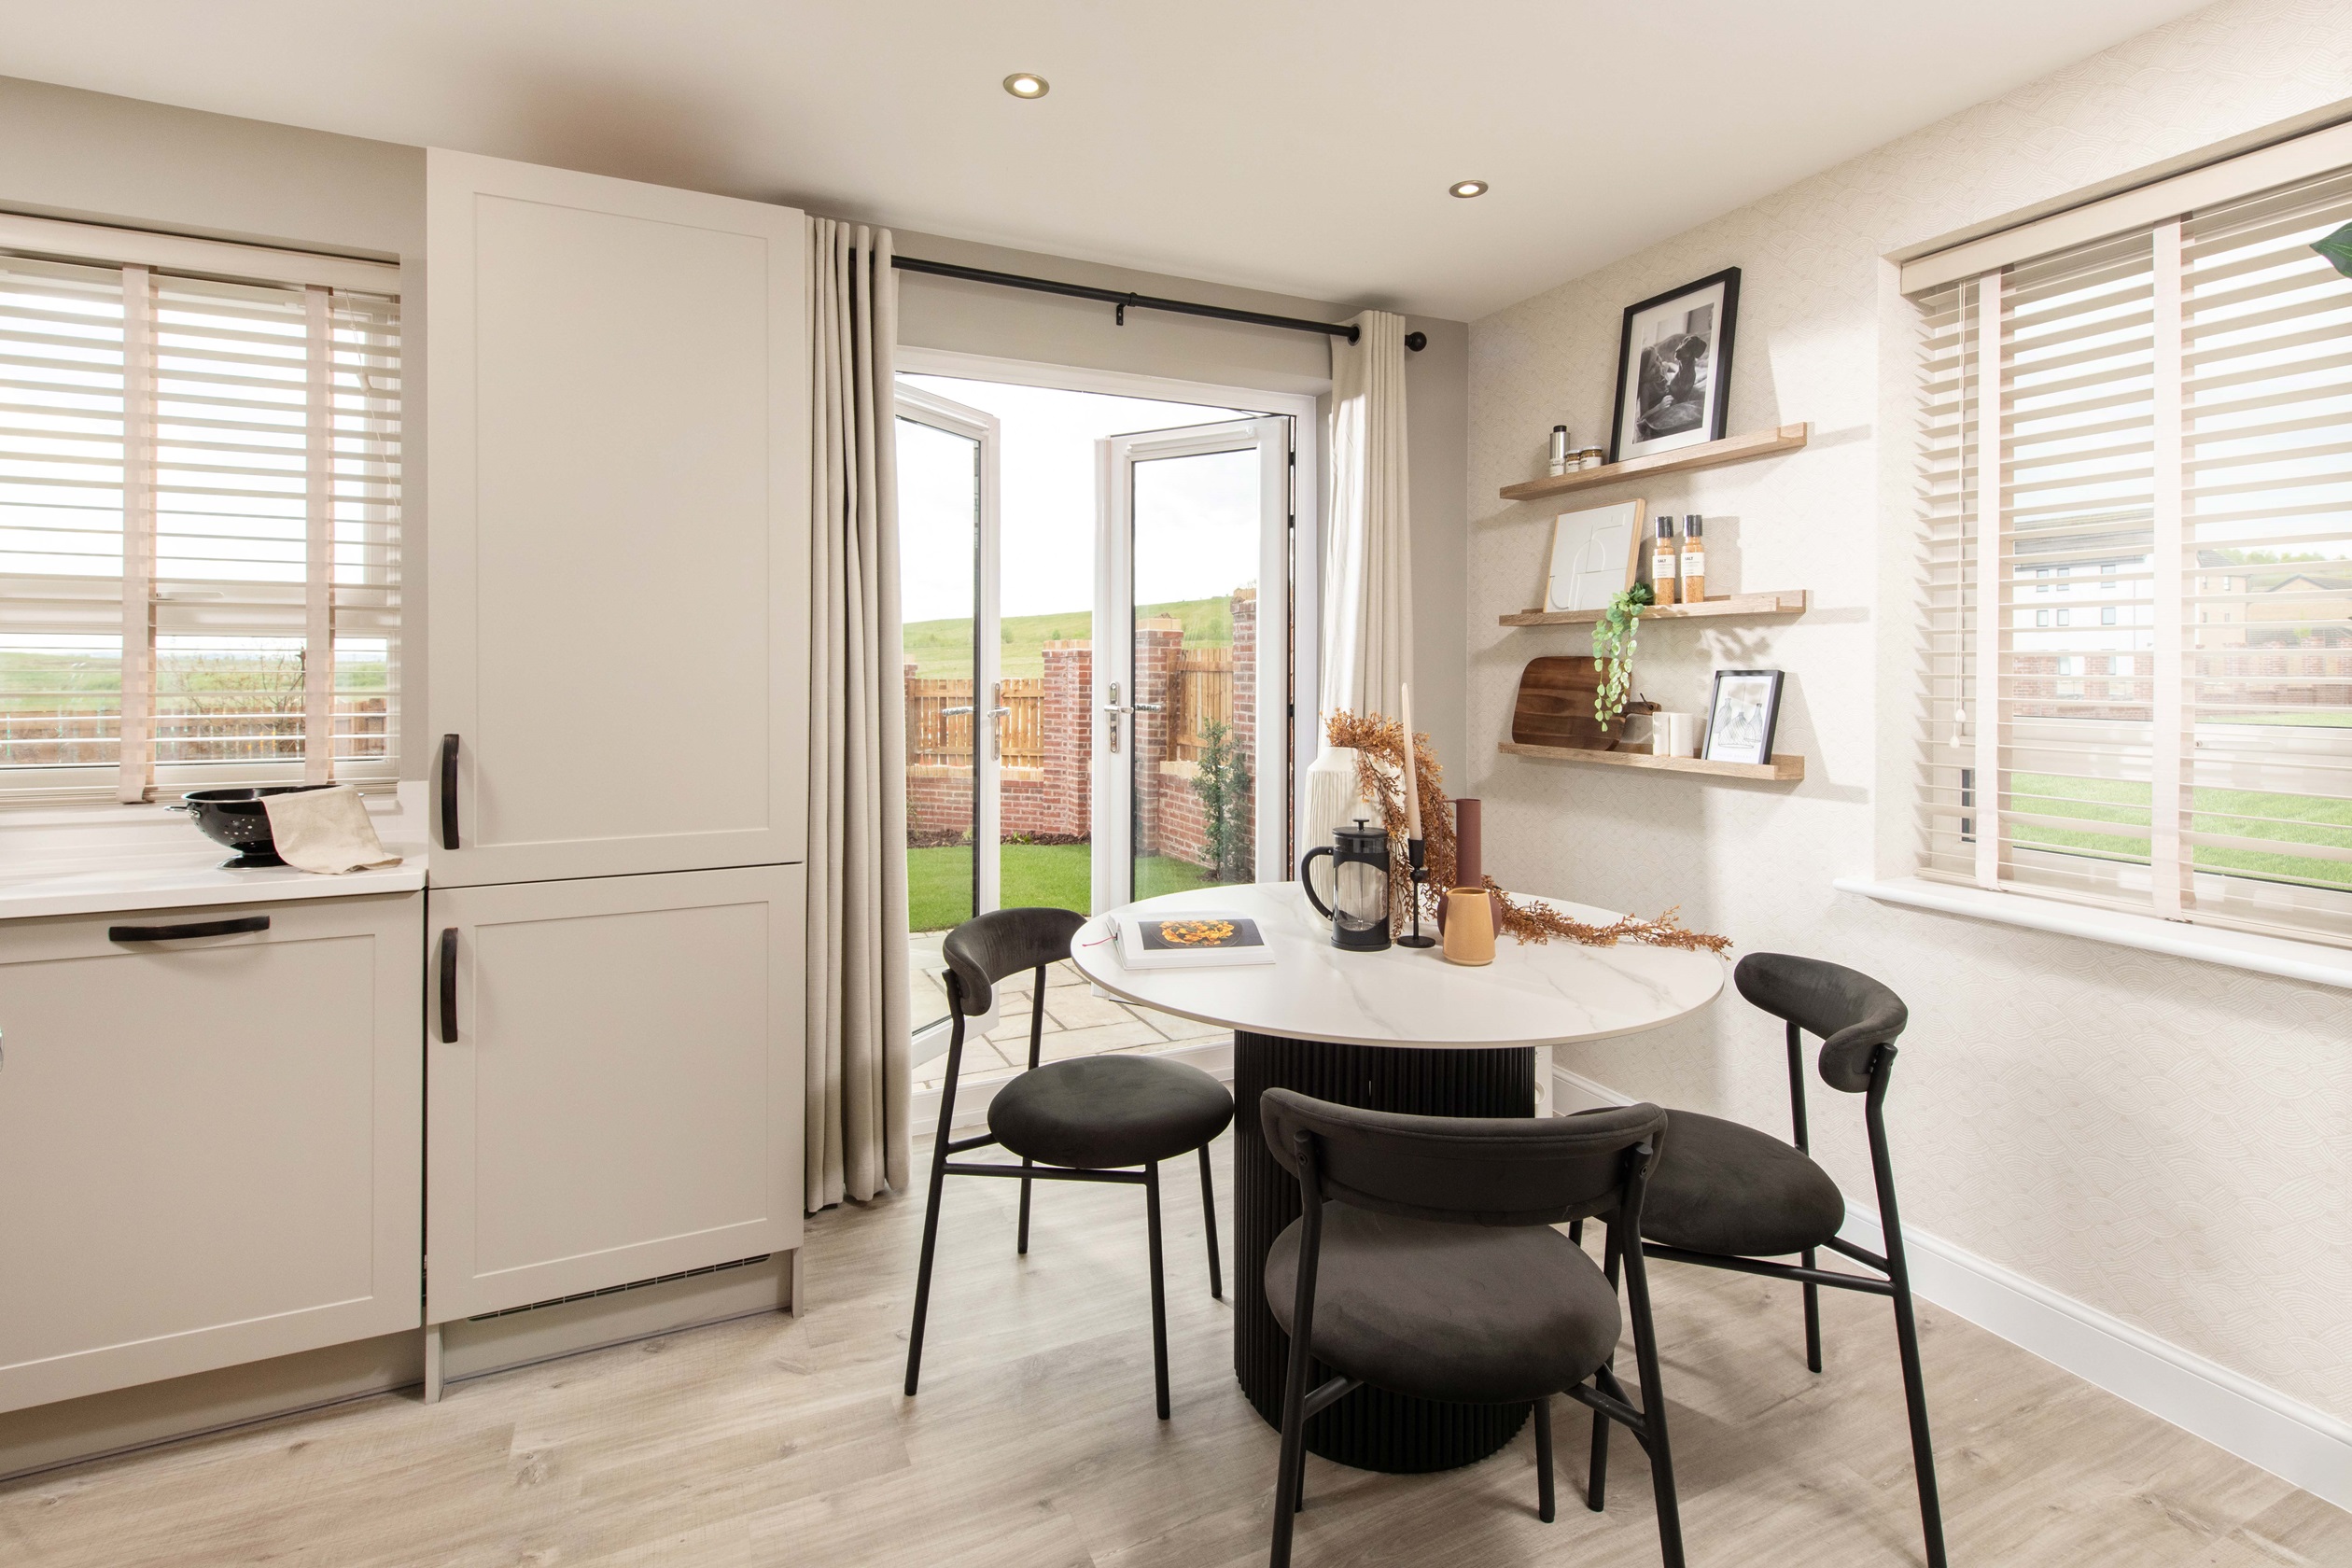 Property 3 of 10. Bar Yw Affinity Moresby Show Home